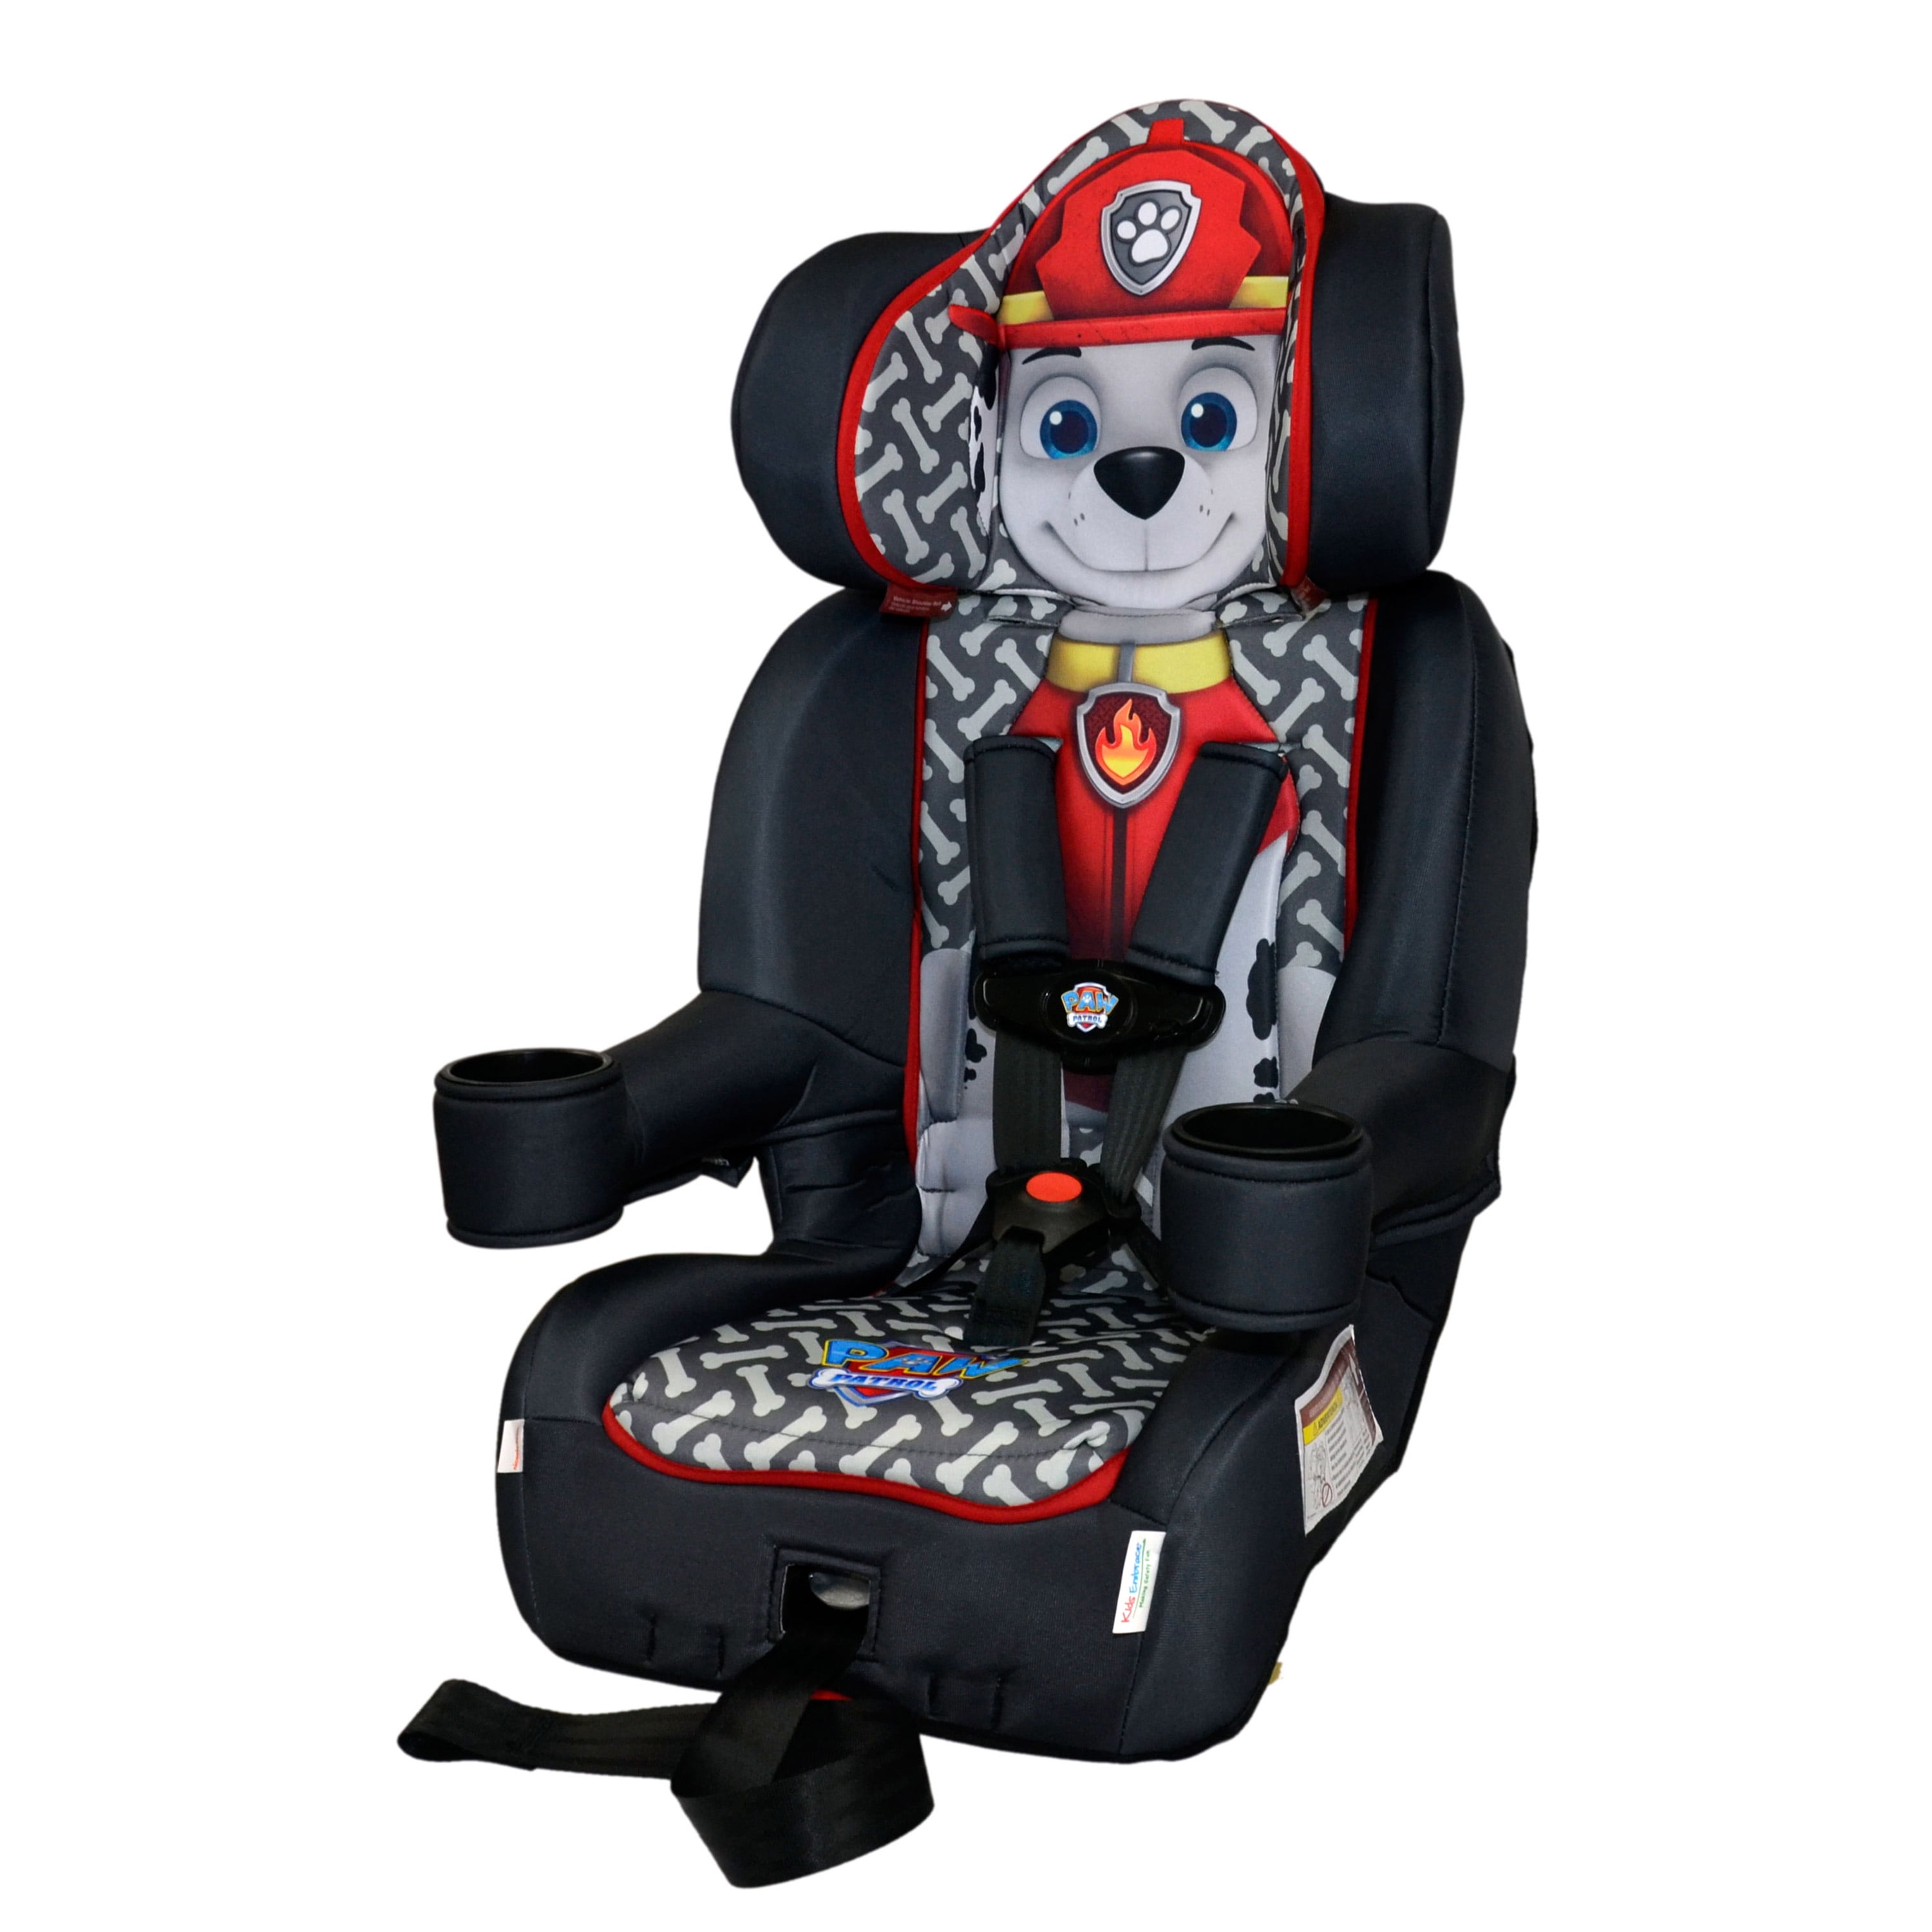 Nickelodeon Paw Patrol Marshall KidsEmbrace 2-in-1 Harness Booster Car Seat 